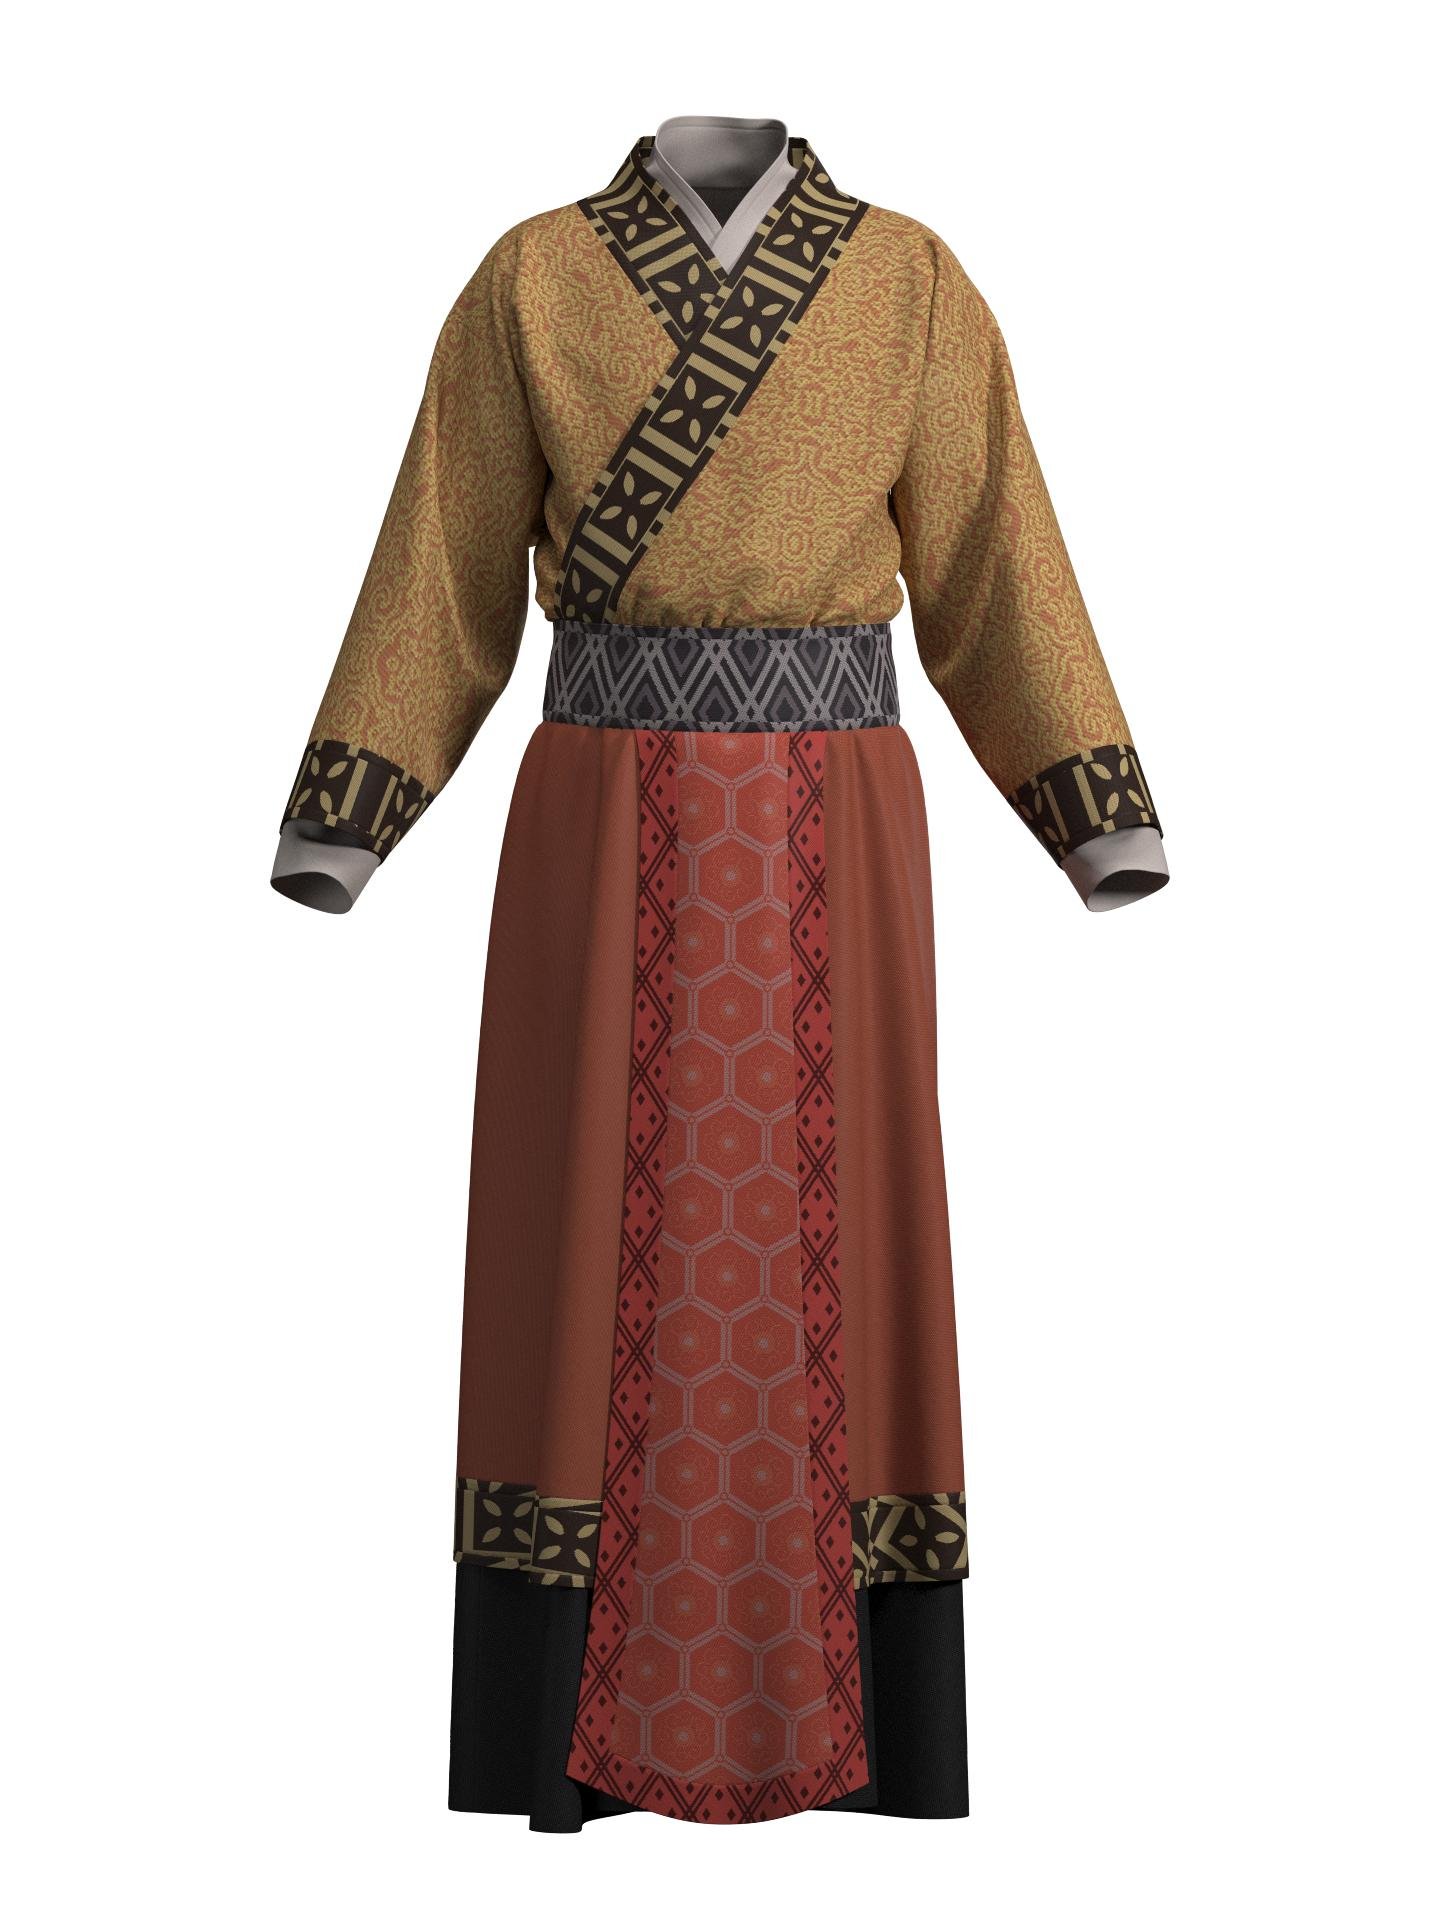 Upper garnment and underskirt for men in Shang Dynasty by X²H